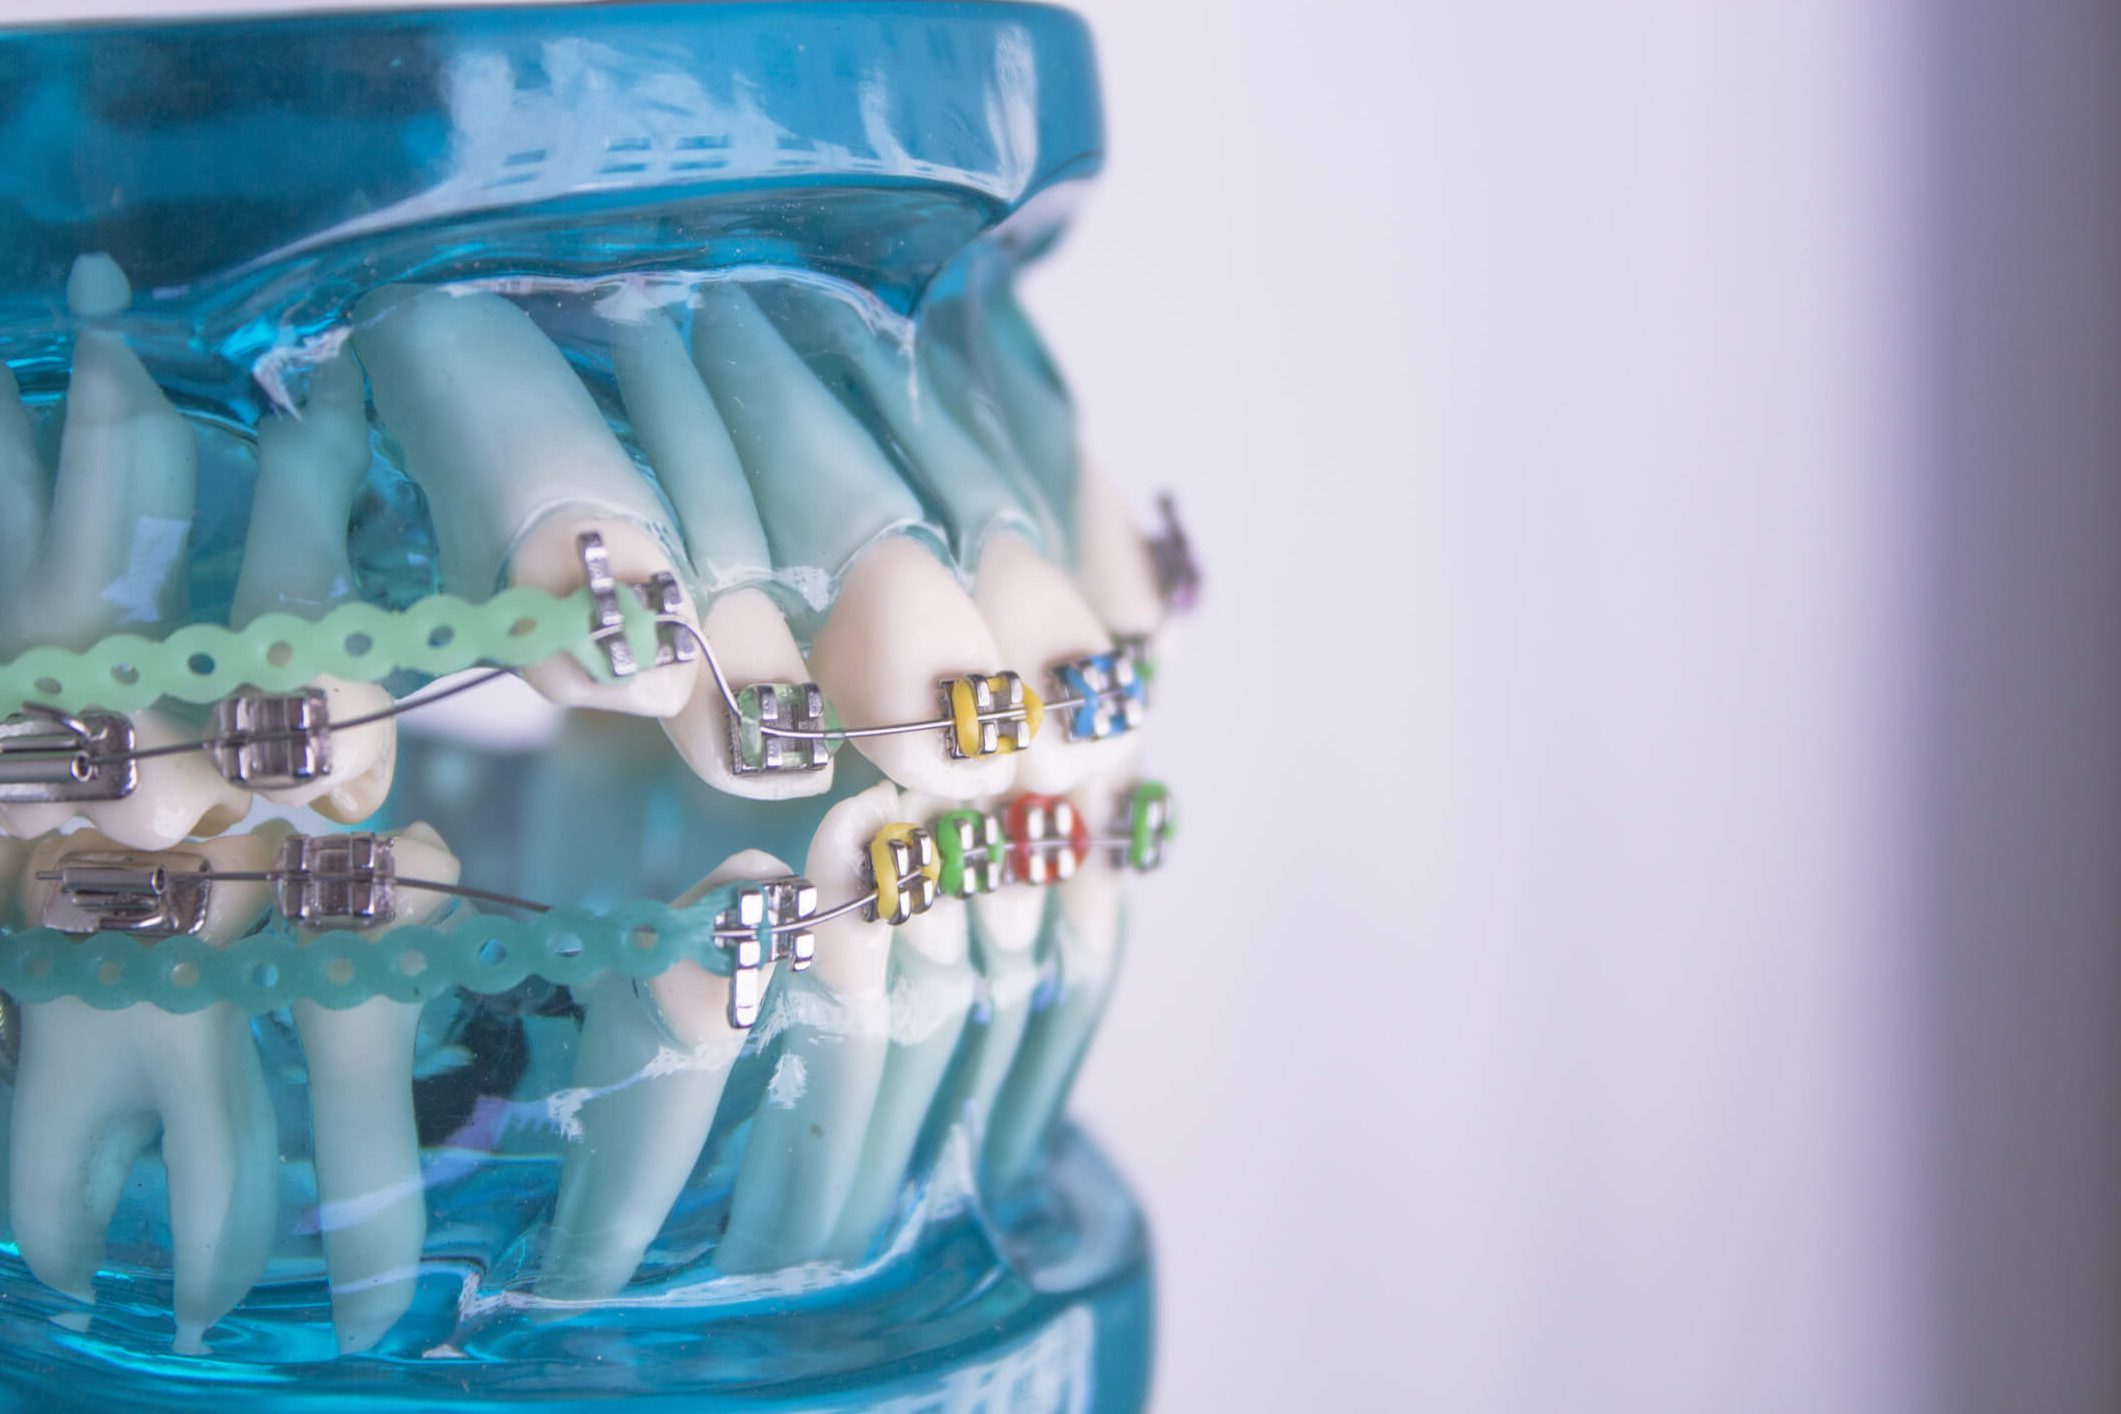 How Much Does Invisalign Cost in Huntersville, NC?